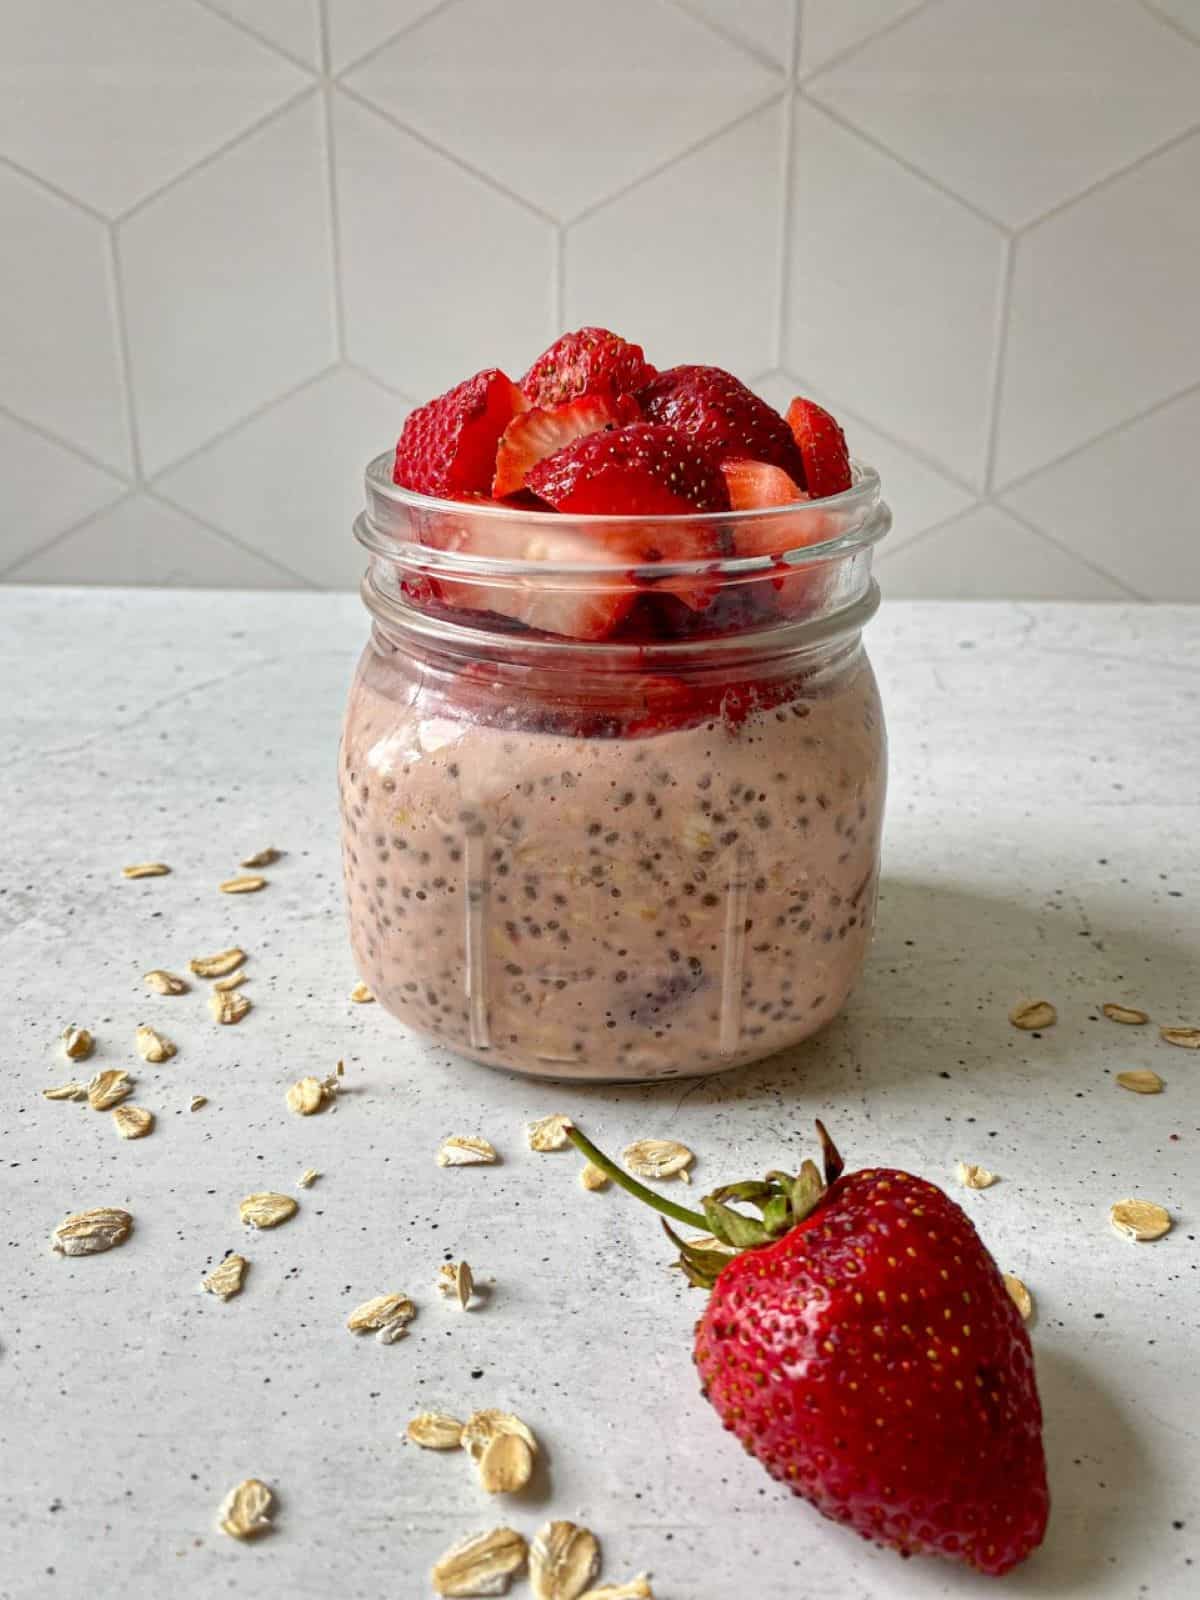 Strawberry Overnight Oats in a mason jar topped with chopped fresh strawberries. A large strawberry and oats are scattered around the jar.